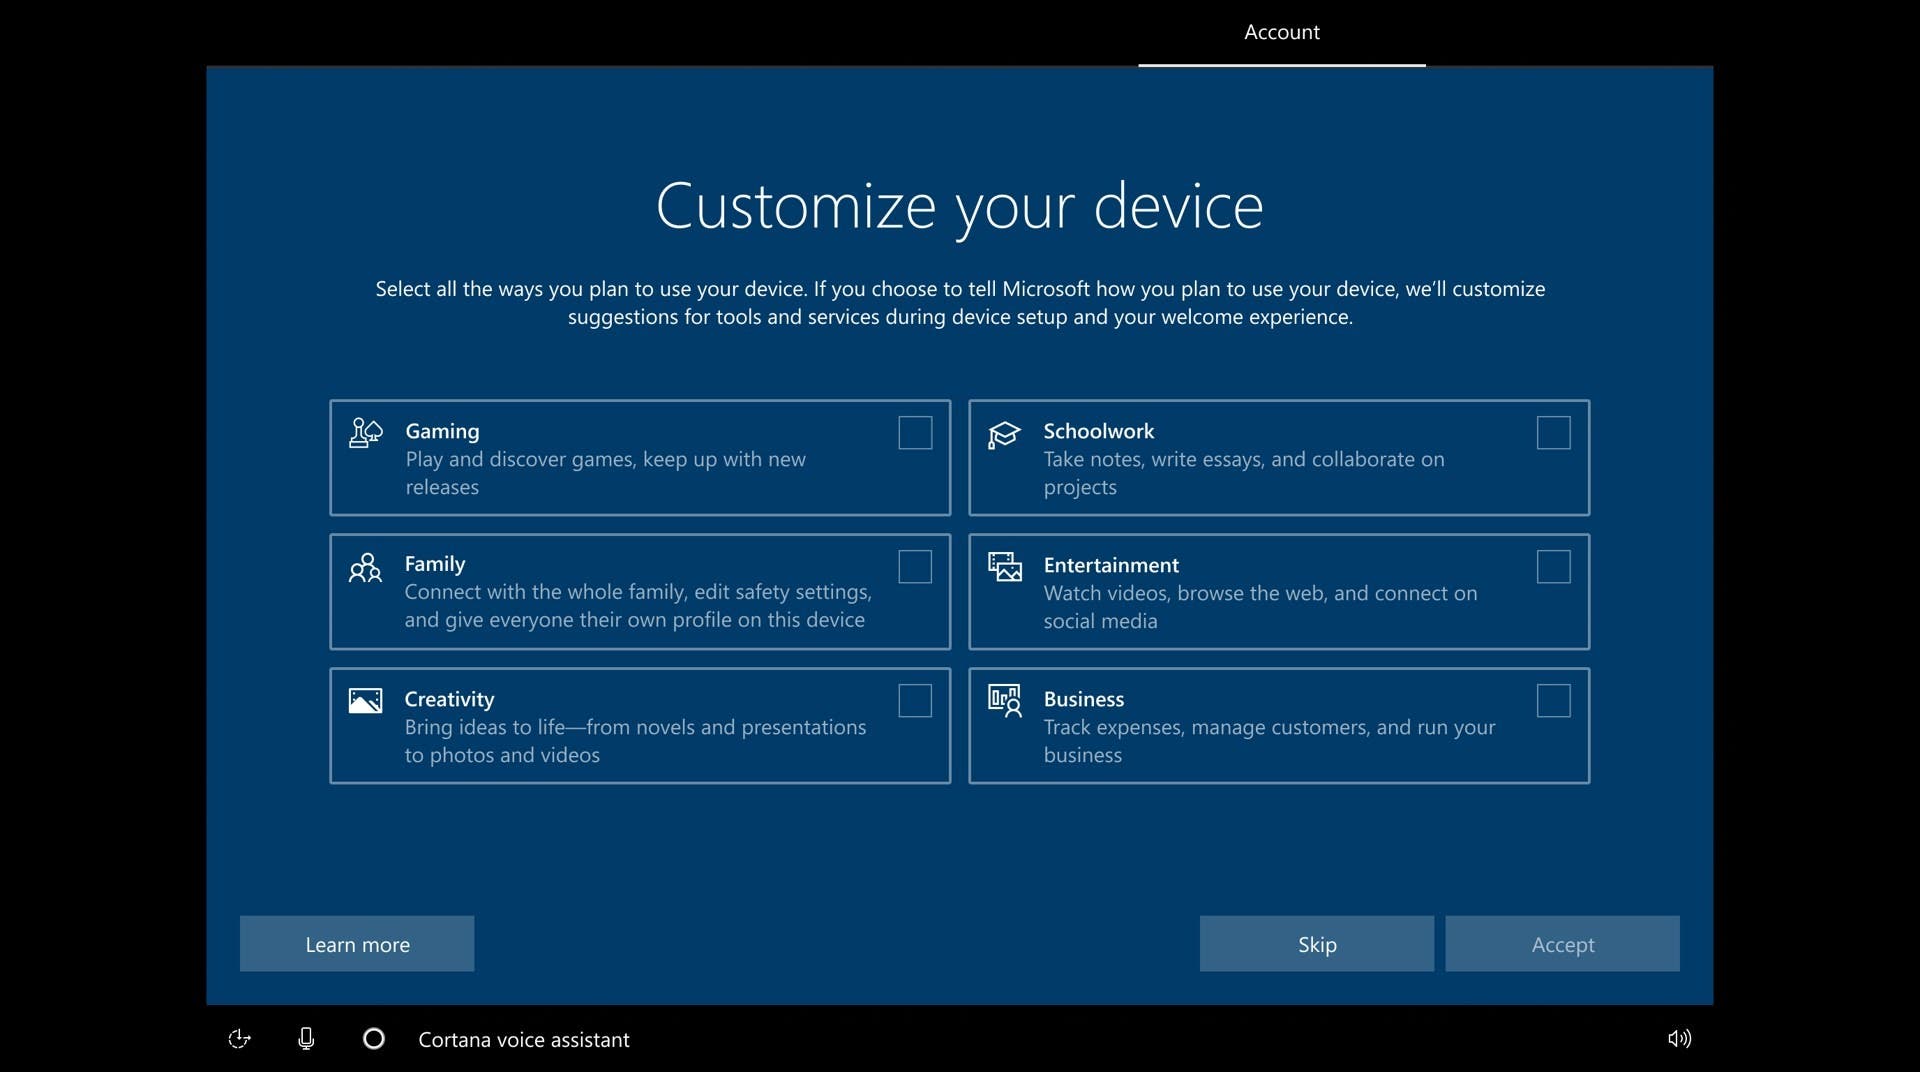 Microsoft is testing a new Windows 10 device setup feature